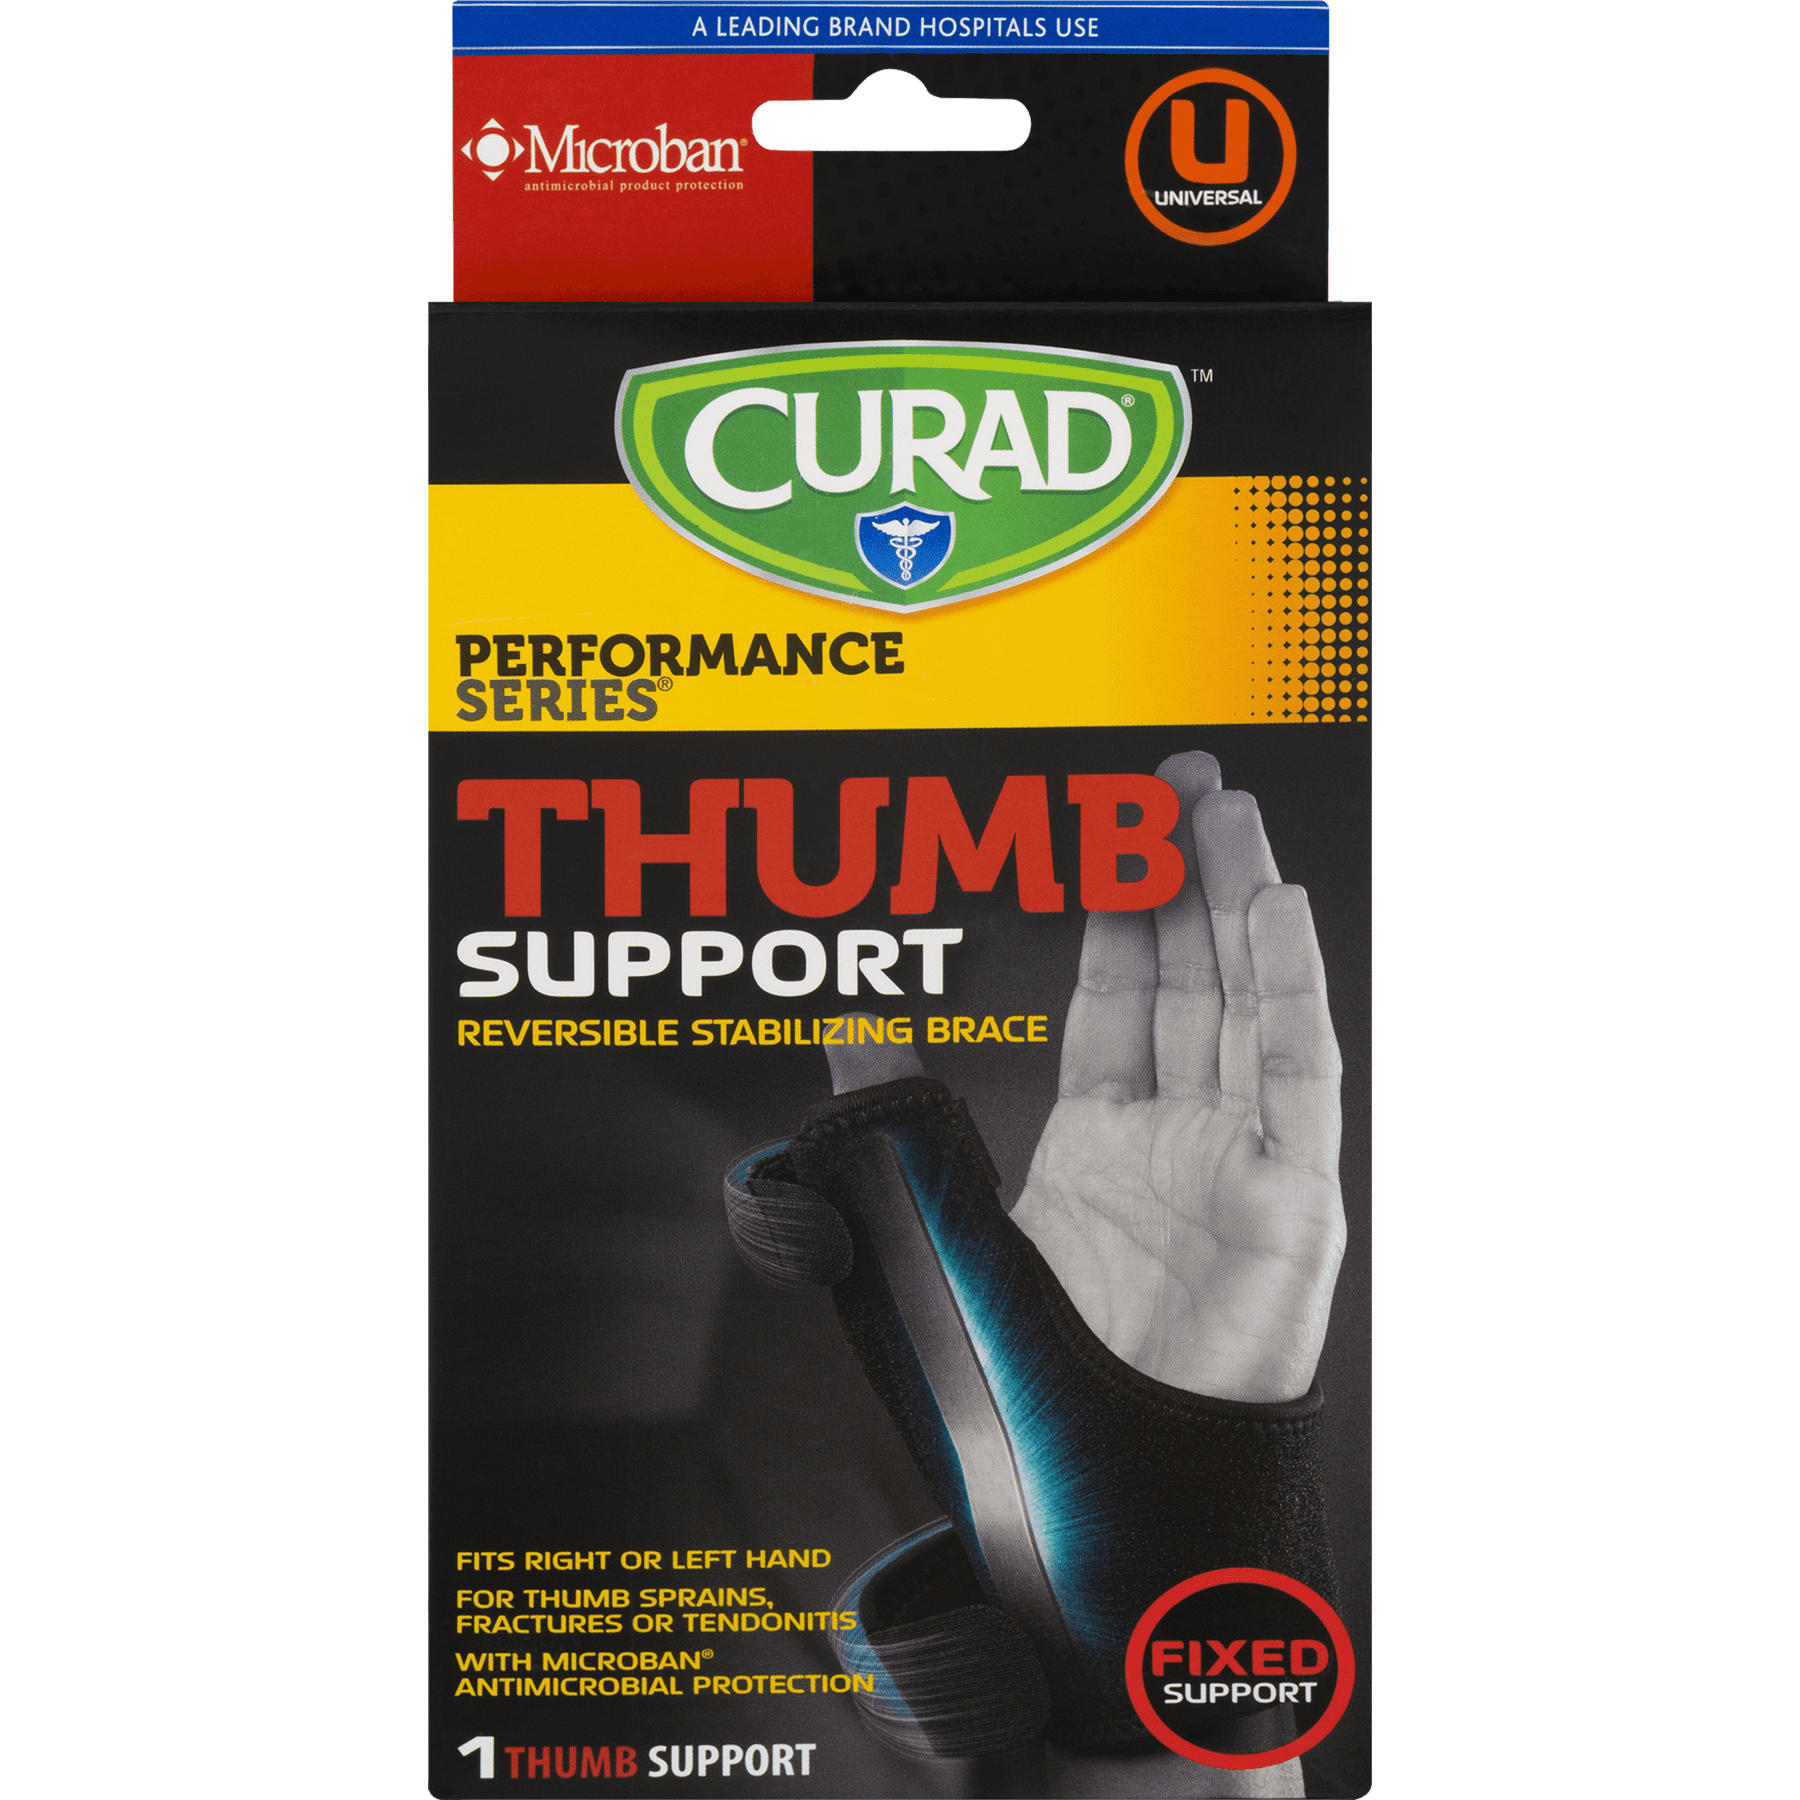 Thumb Sprains or Fractures for Tendonitis CURAD Universal Thumb Brace with Fixed Support Universal Fit Treated with Microban Technology 